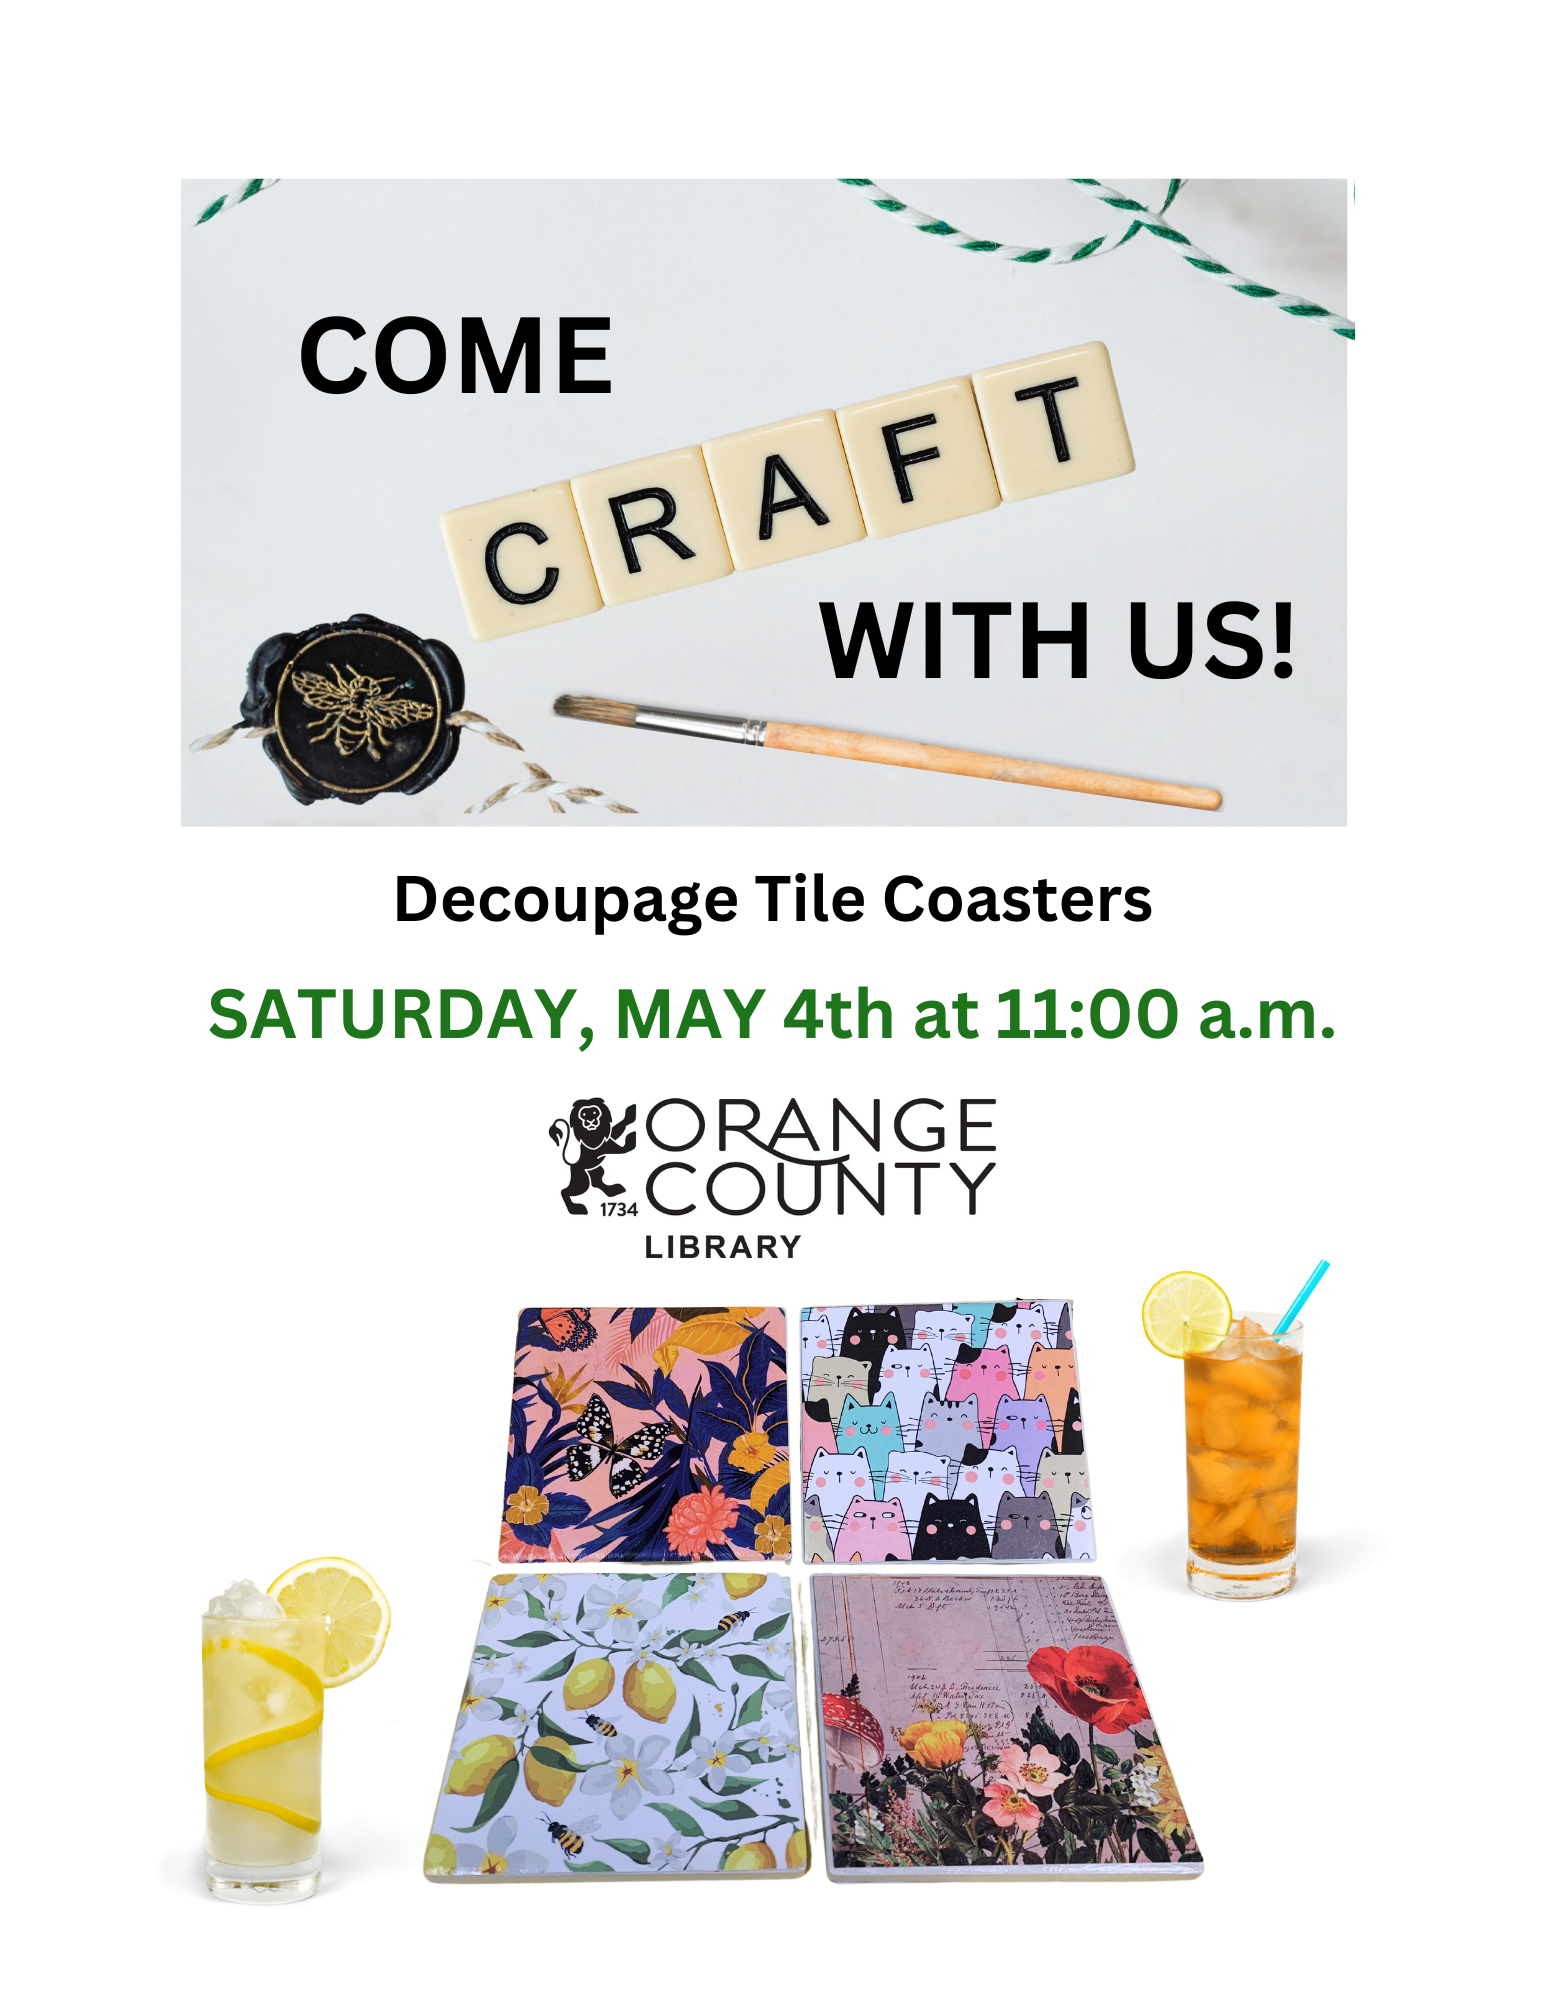 Come craft with us! Decoupage Tile Coasters Saturday May 4th at 11:00 AM